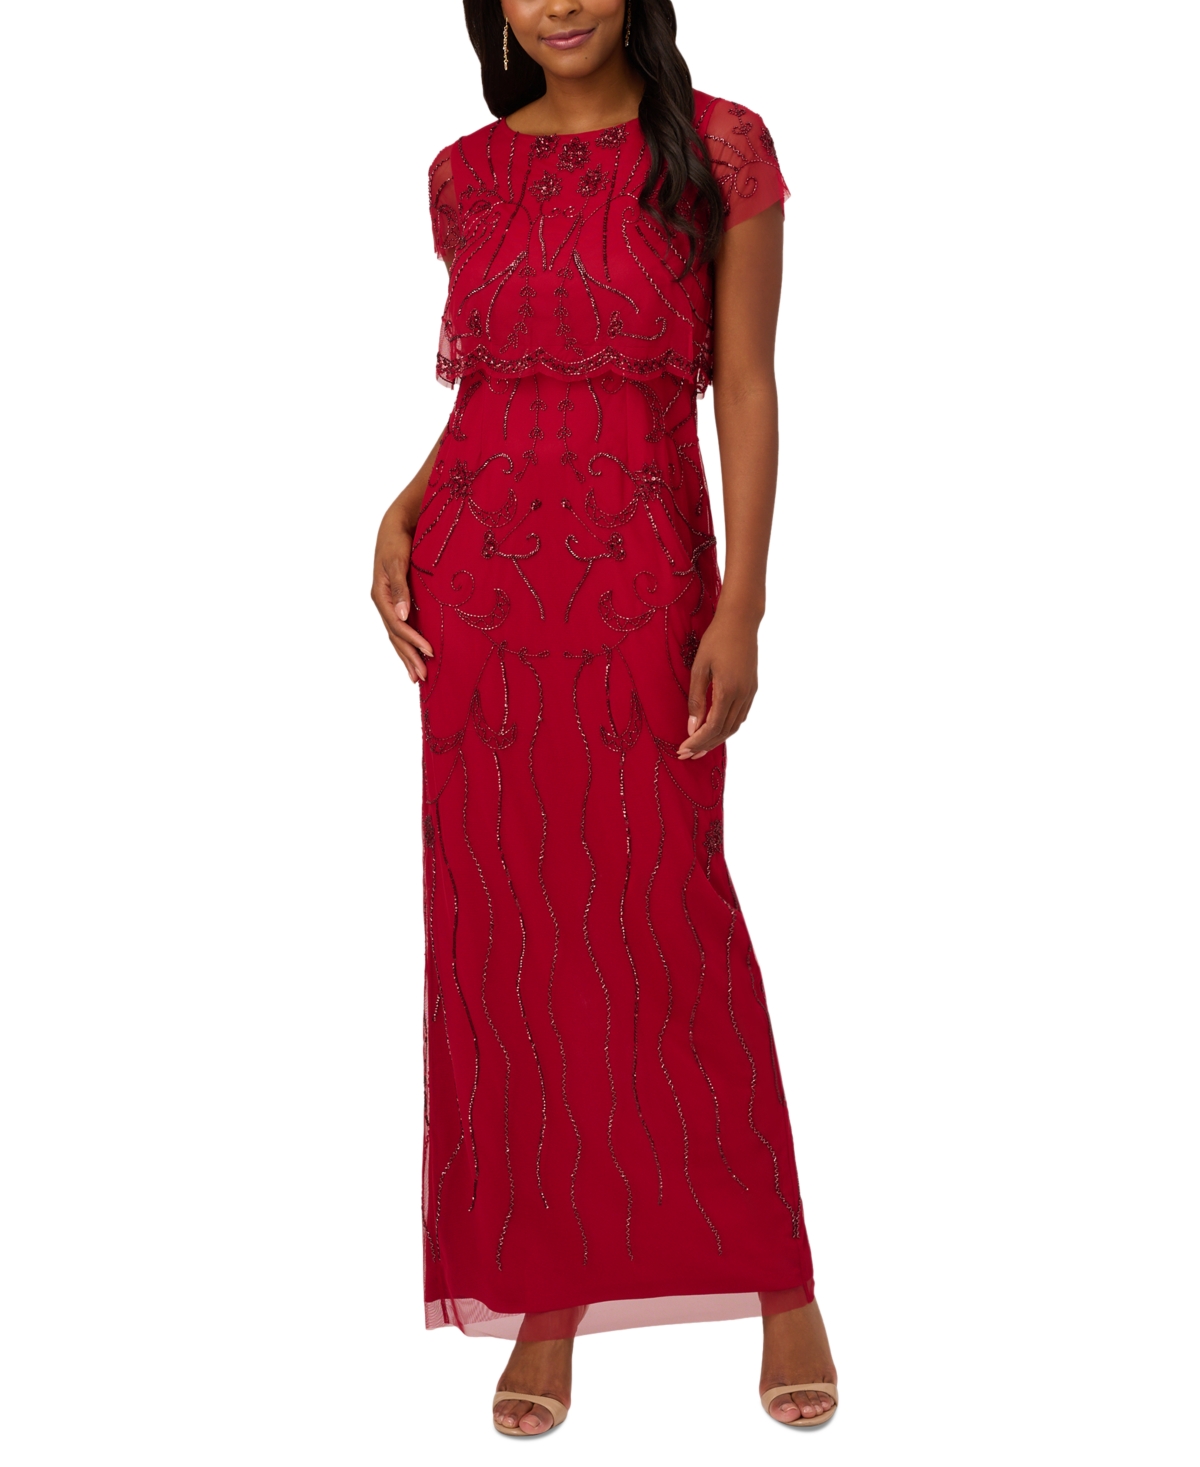 1920s Evening Dresses & Formal Gowns Adrianna Papell Petite Beaded Scalloped-Popover Gown - Cranberry $229.00 AT vintagedancer.com